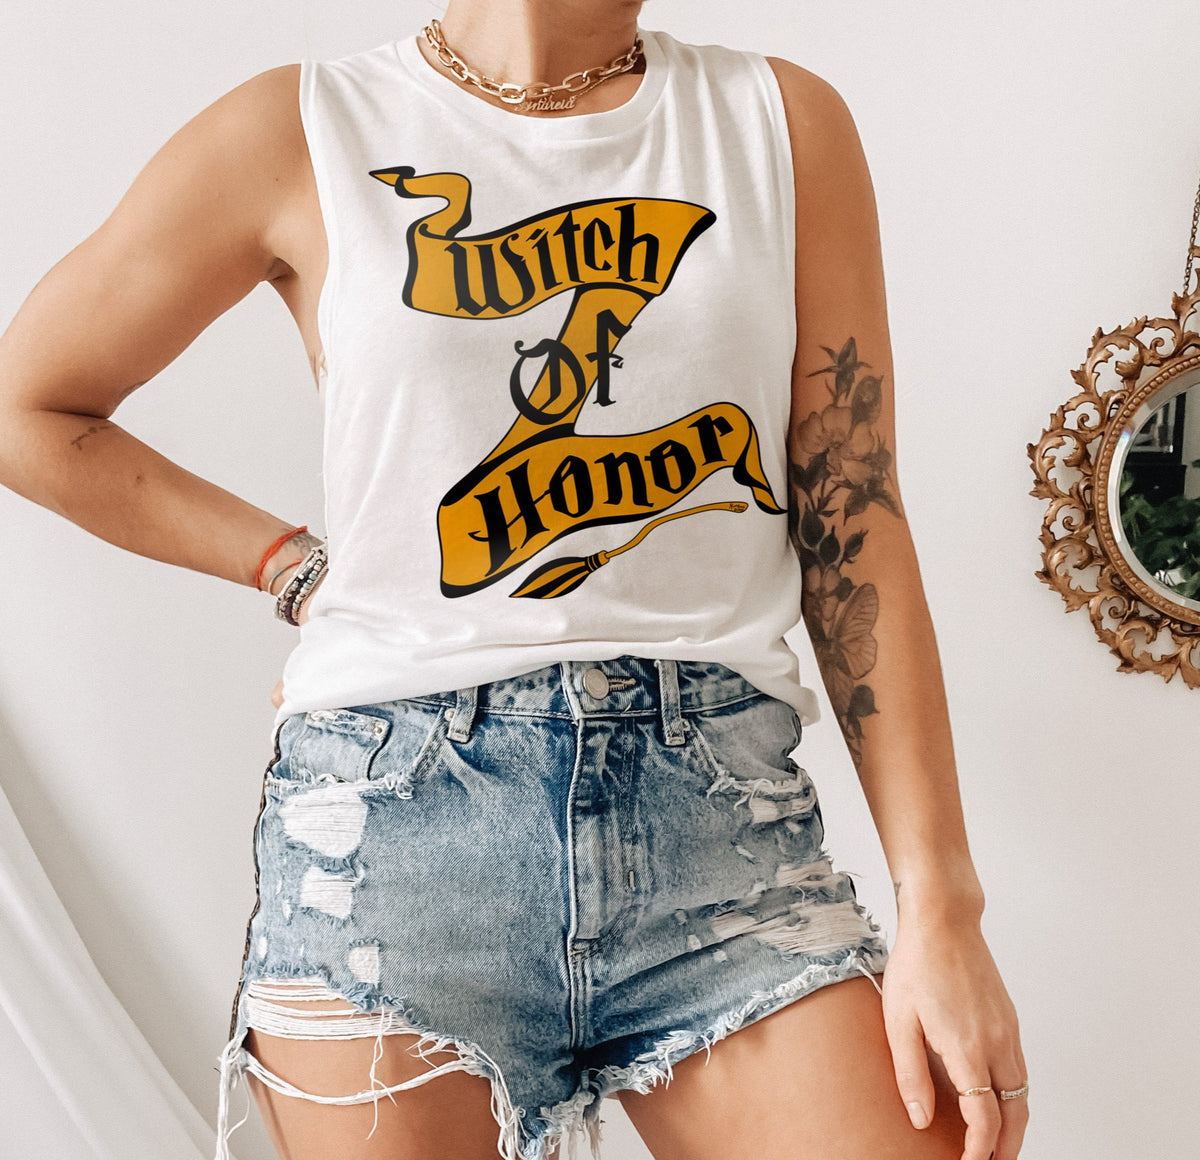 White muscle tank saying witch of honor - HighCiti